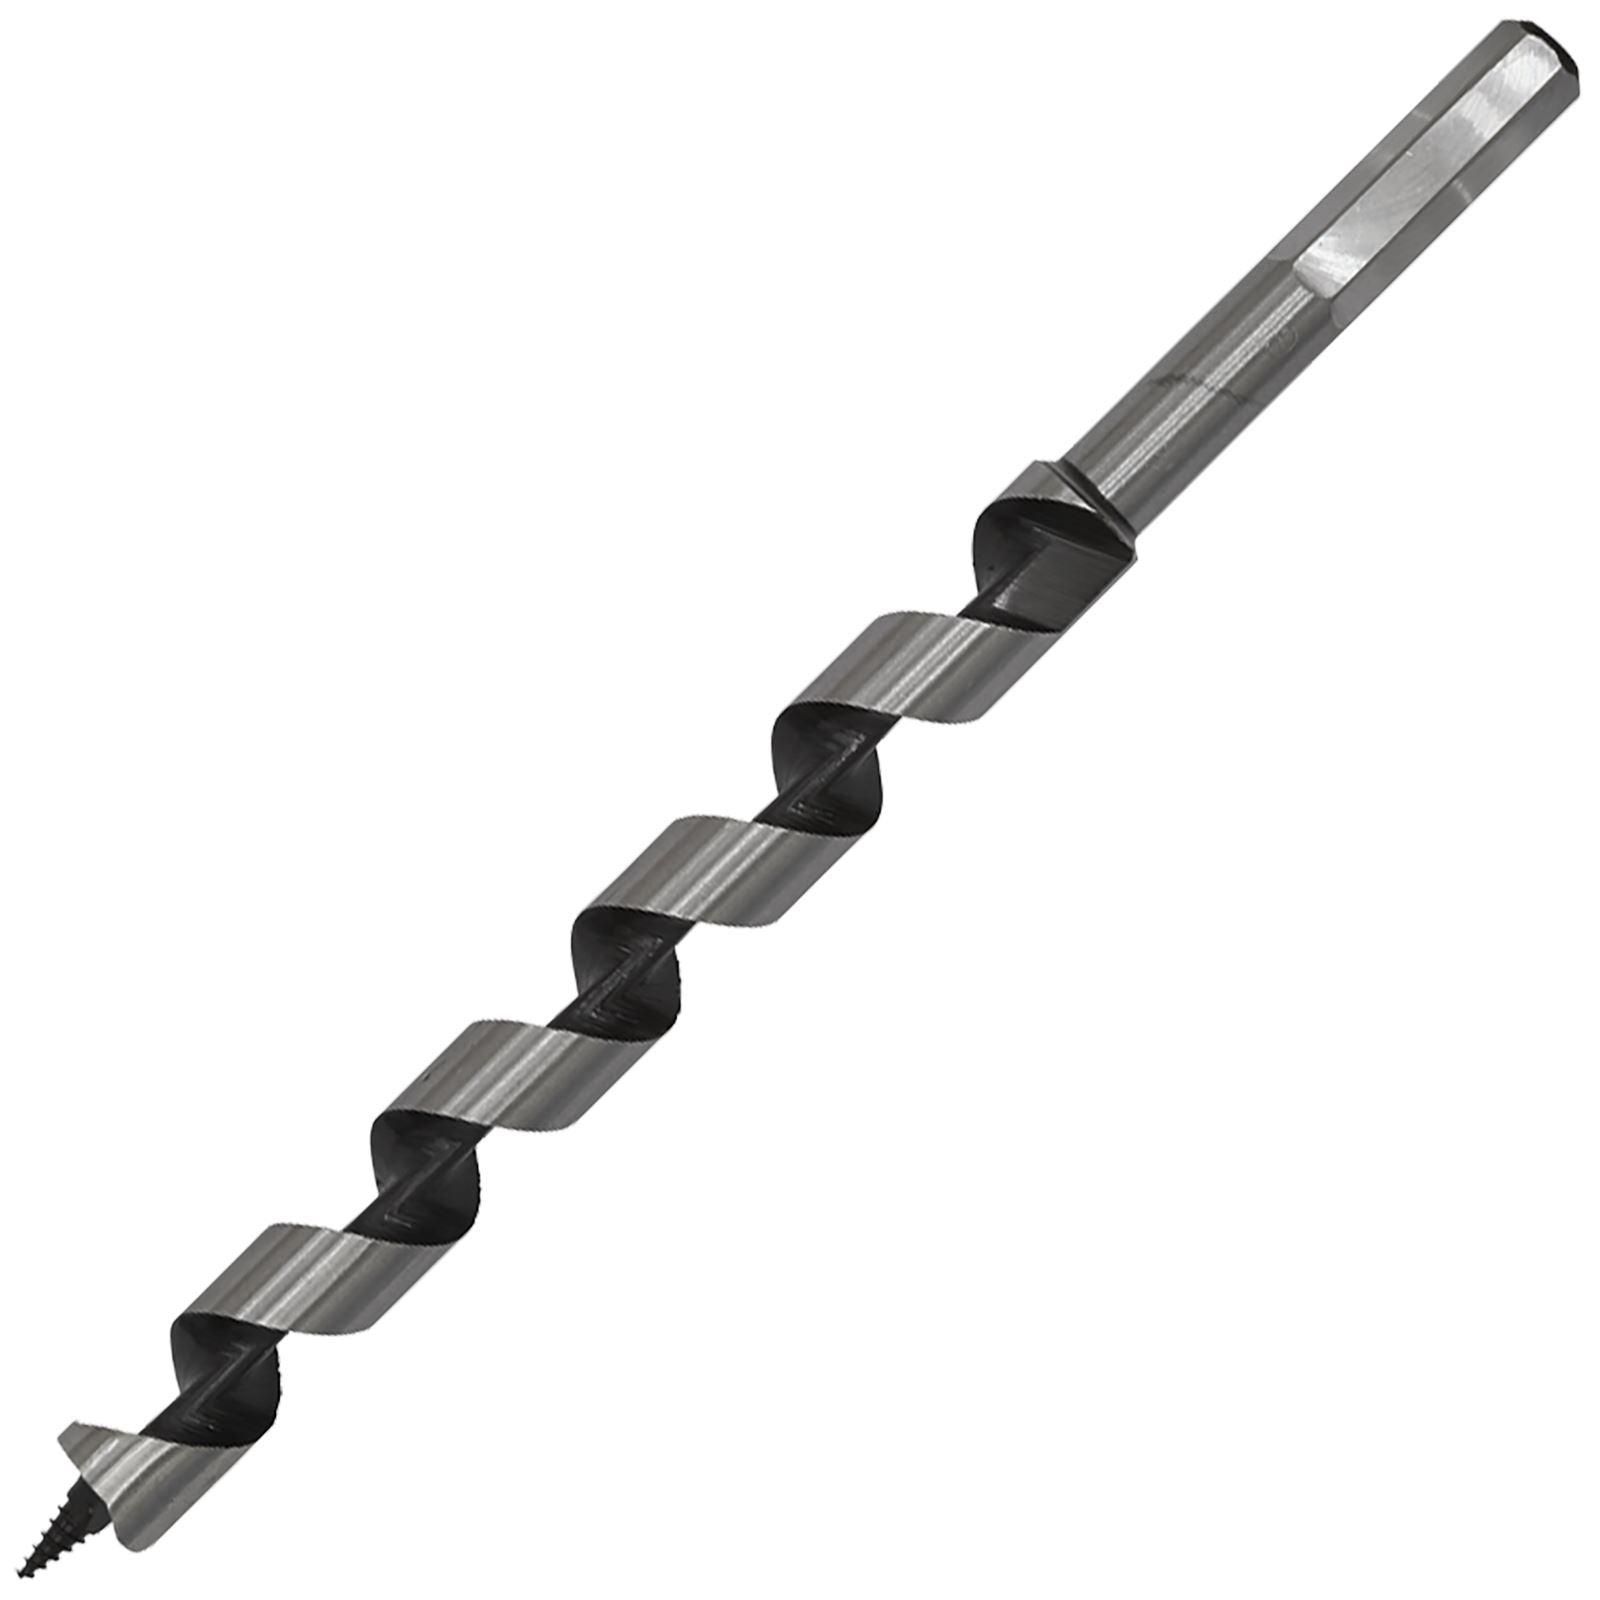 Worksafe by Sealey Auger Wood Drill Bit 16mm x 235mm